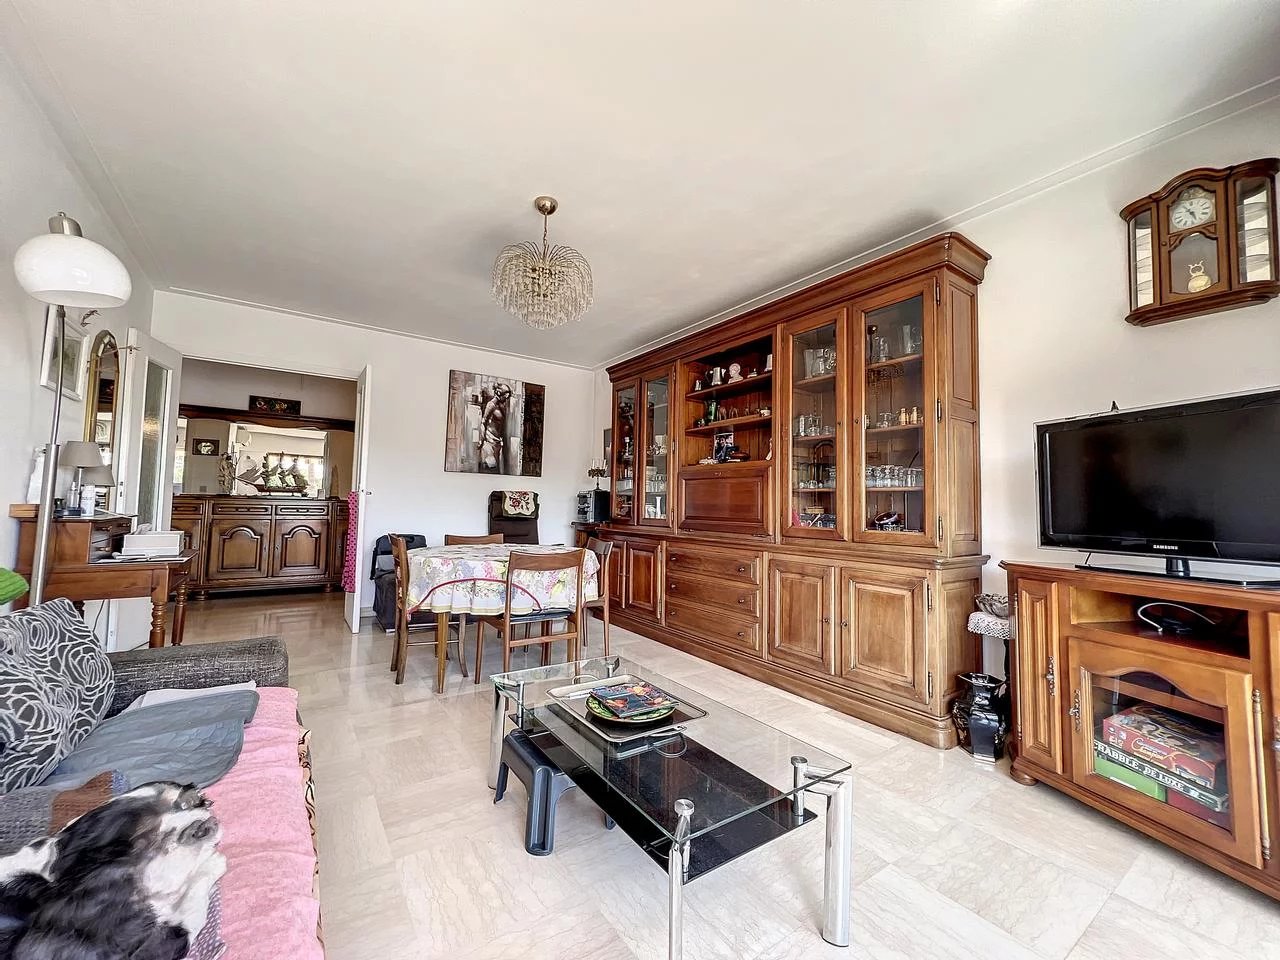 Appartement  2 Rooms 70.11m2  for sale   283 500 €